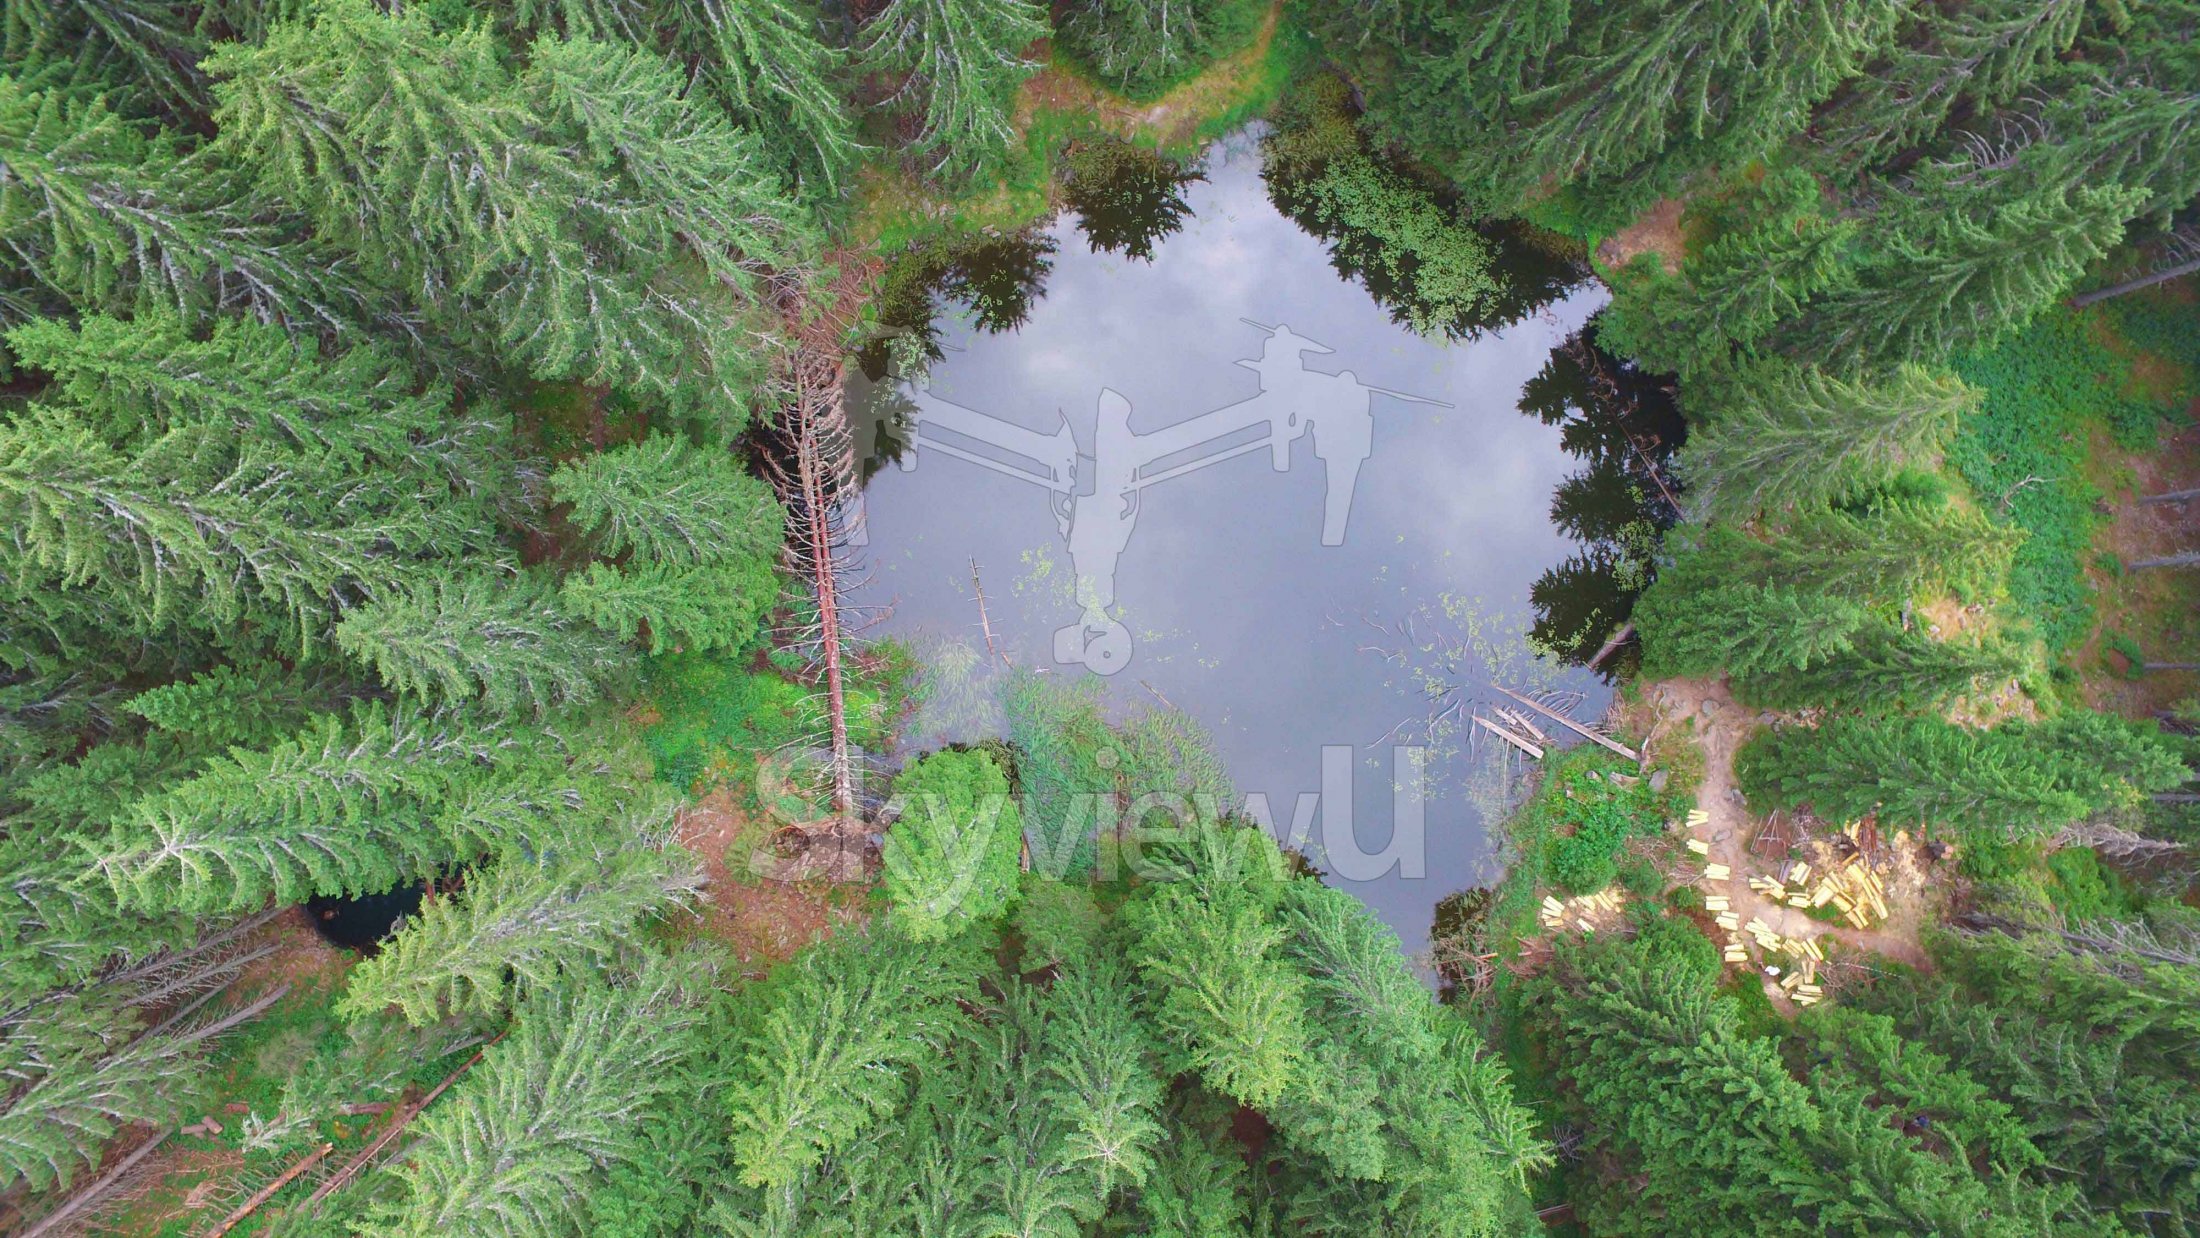 SkyviewU-Bulgaria-drone-photography-and-copter-aerial-video-with-DJI-Inspire-1-of-sightseeings-,-nature-,-historical-monuments-,-historical-places-,-landscapes-,-tourist-attractions-and-national-treasures3